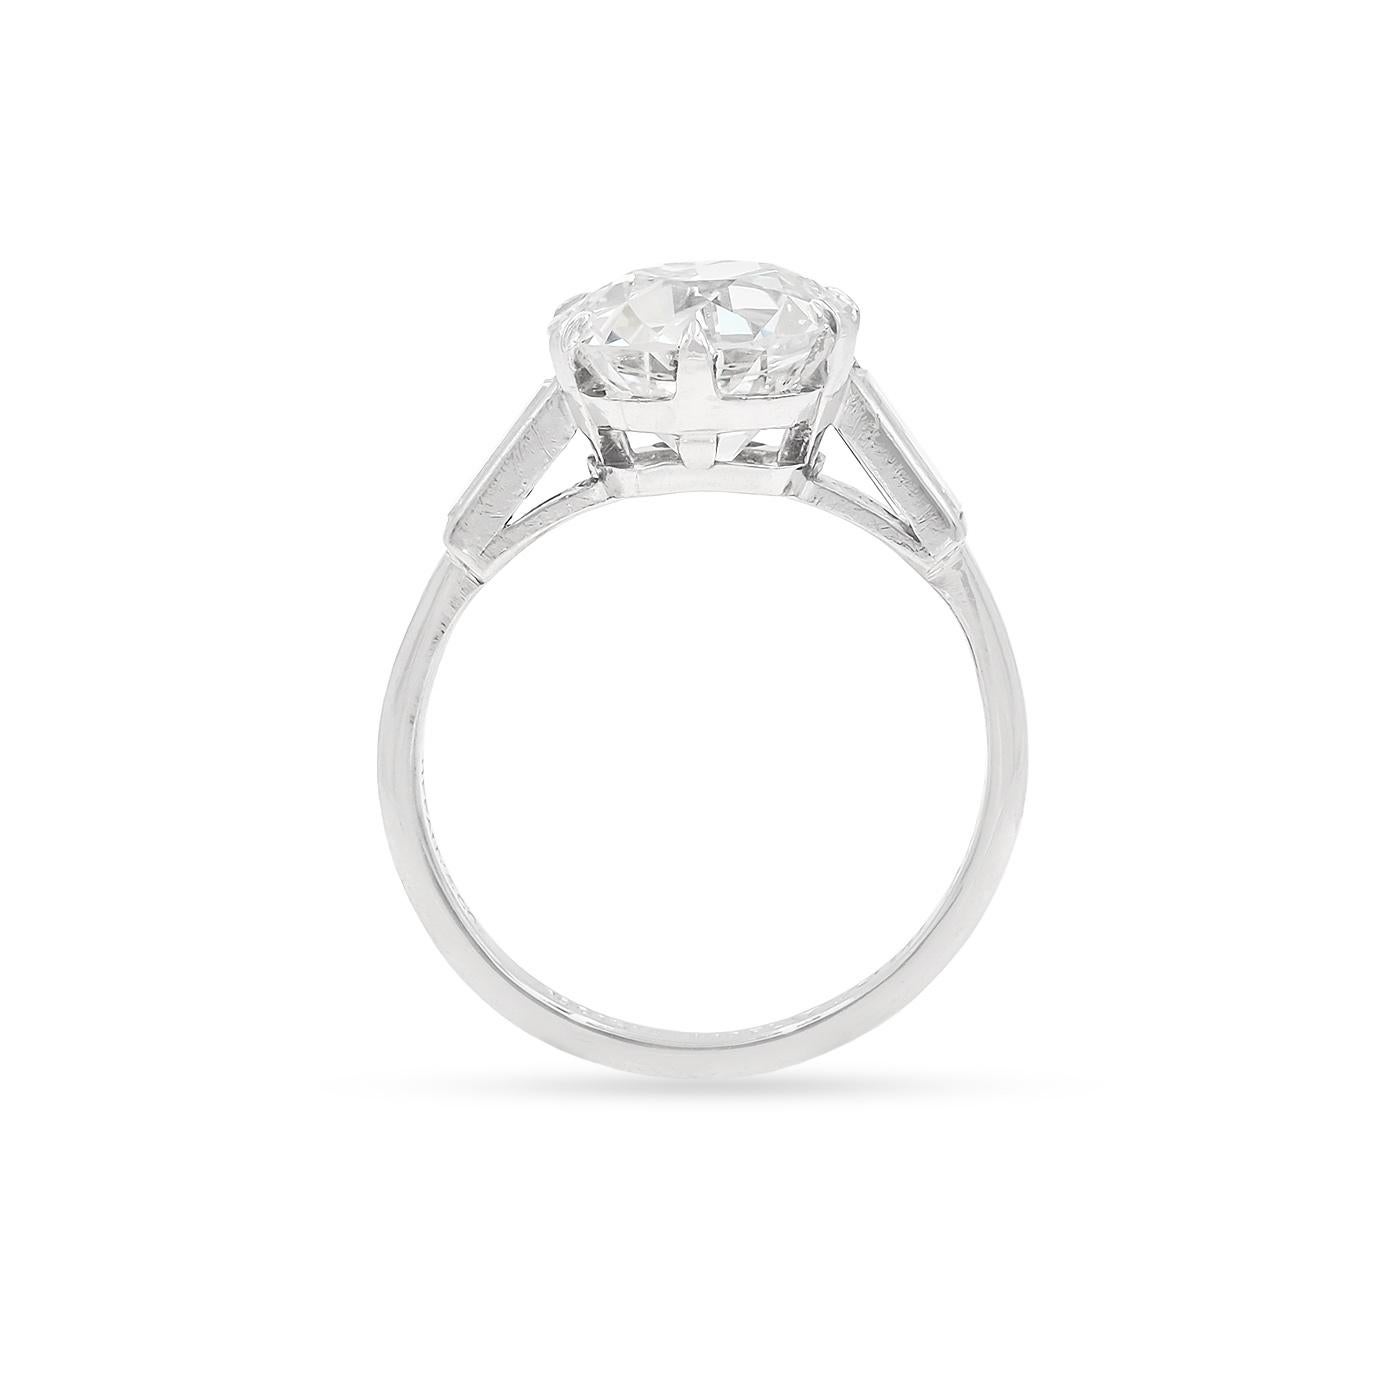 Women's Art Deco 3.01 Carat Old European Cut Diamond Engagement Ring by Tiffany & Co. For Sale